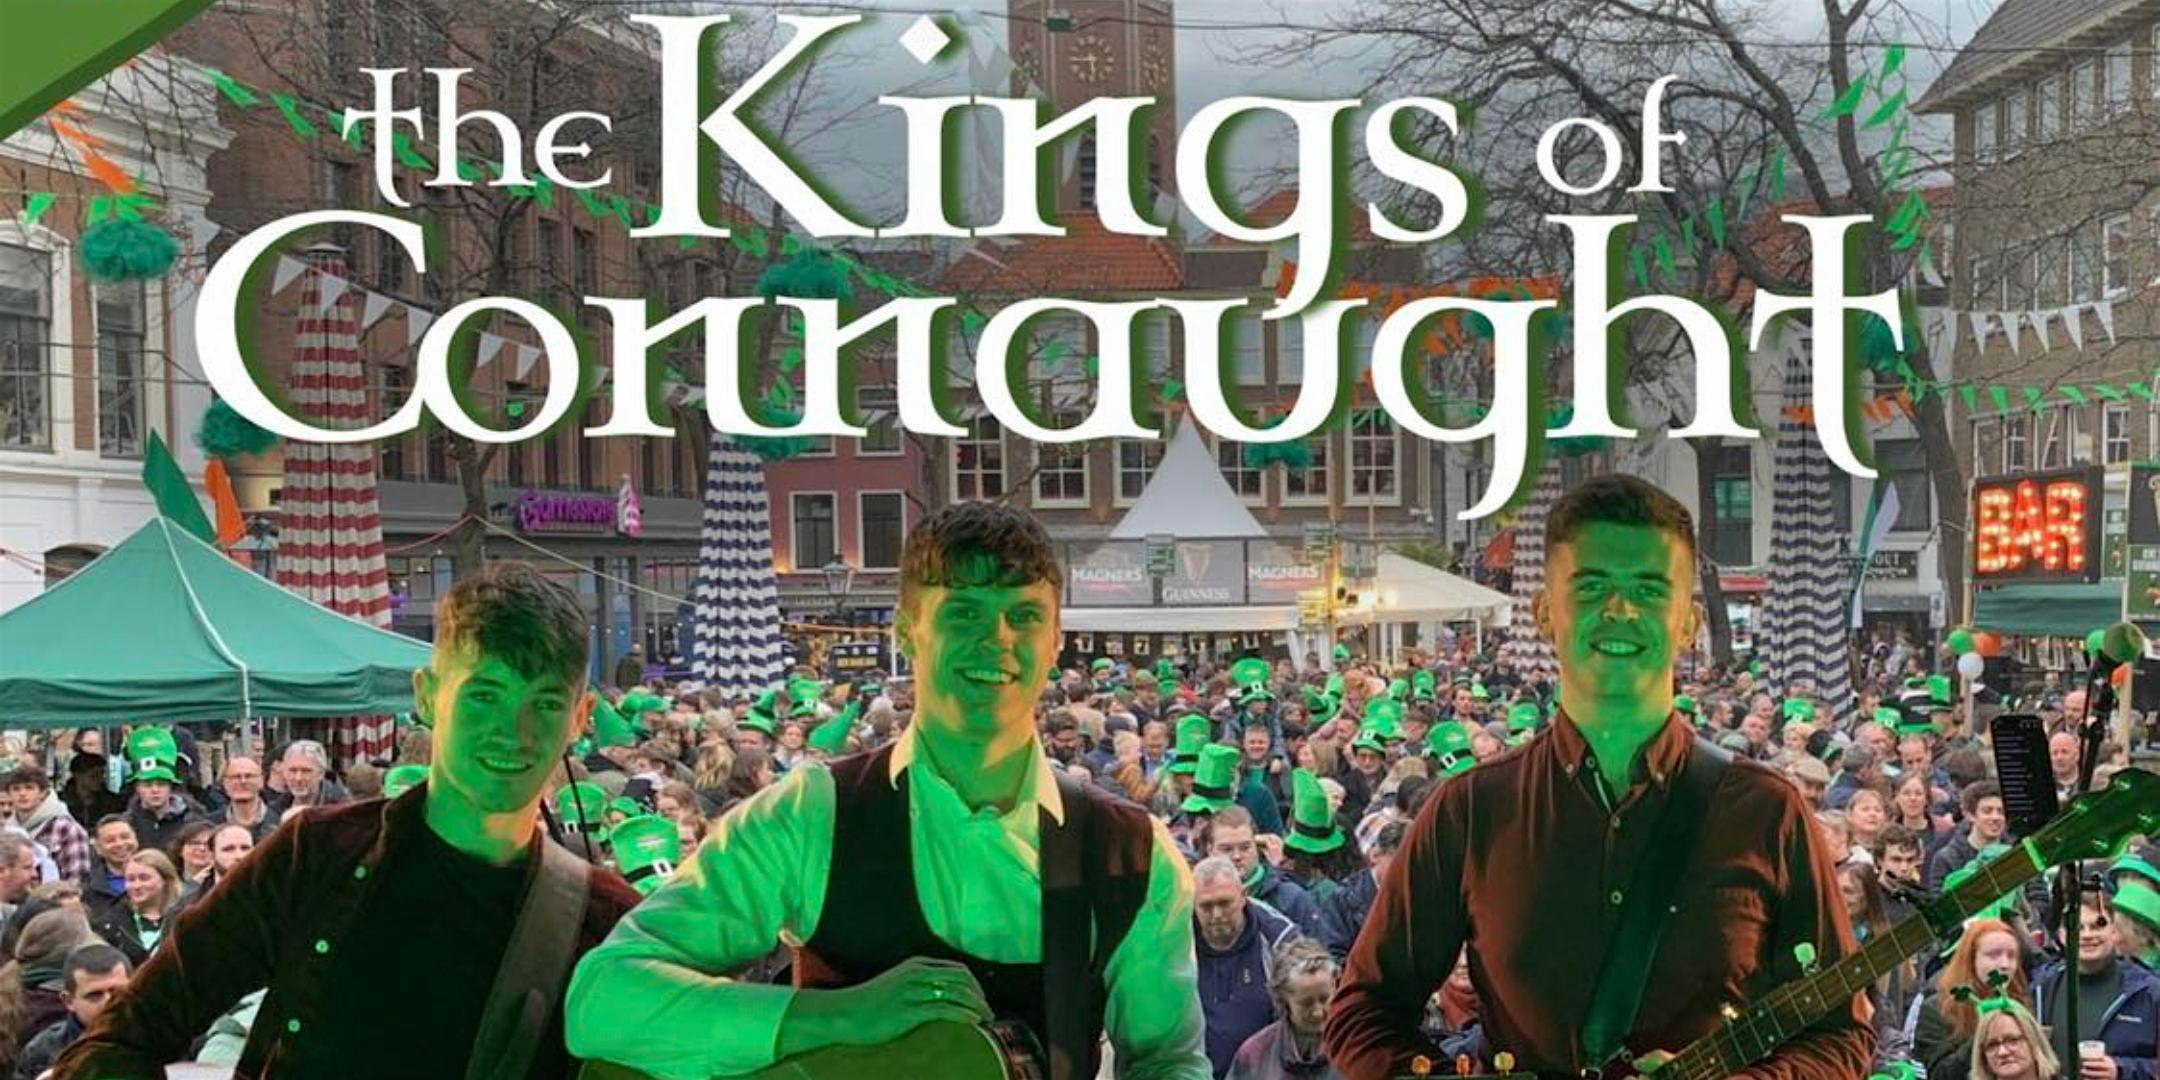 The Kings of Connaught – US Debut Tour!